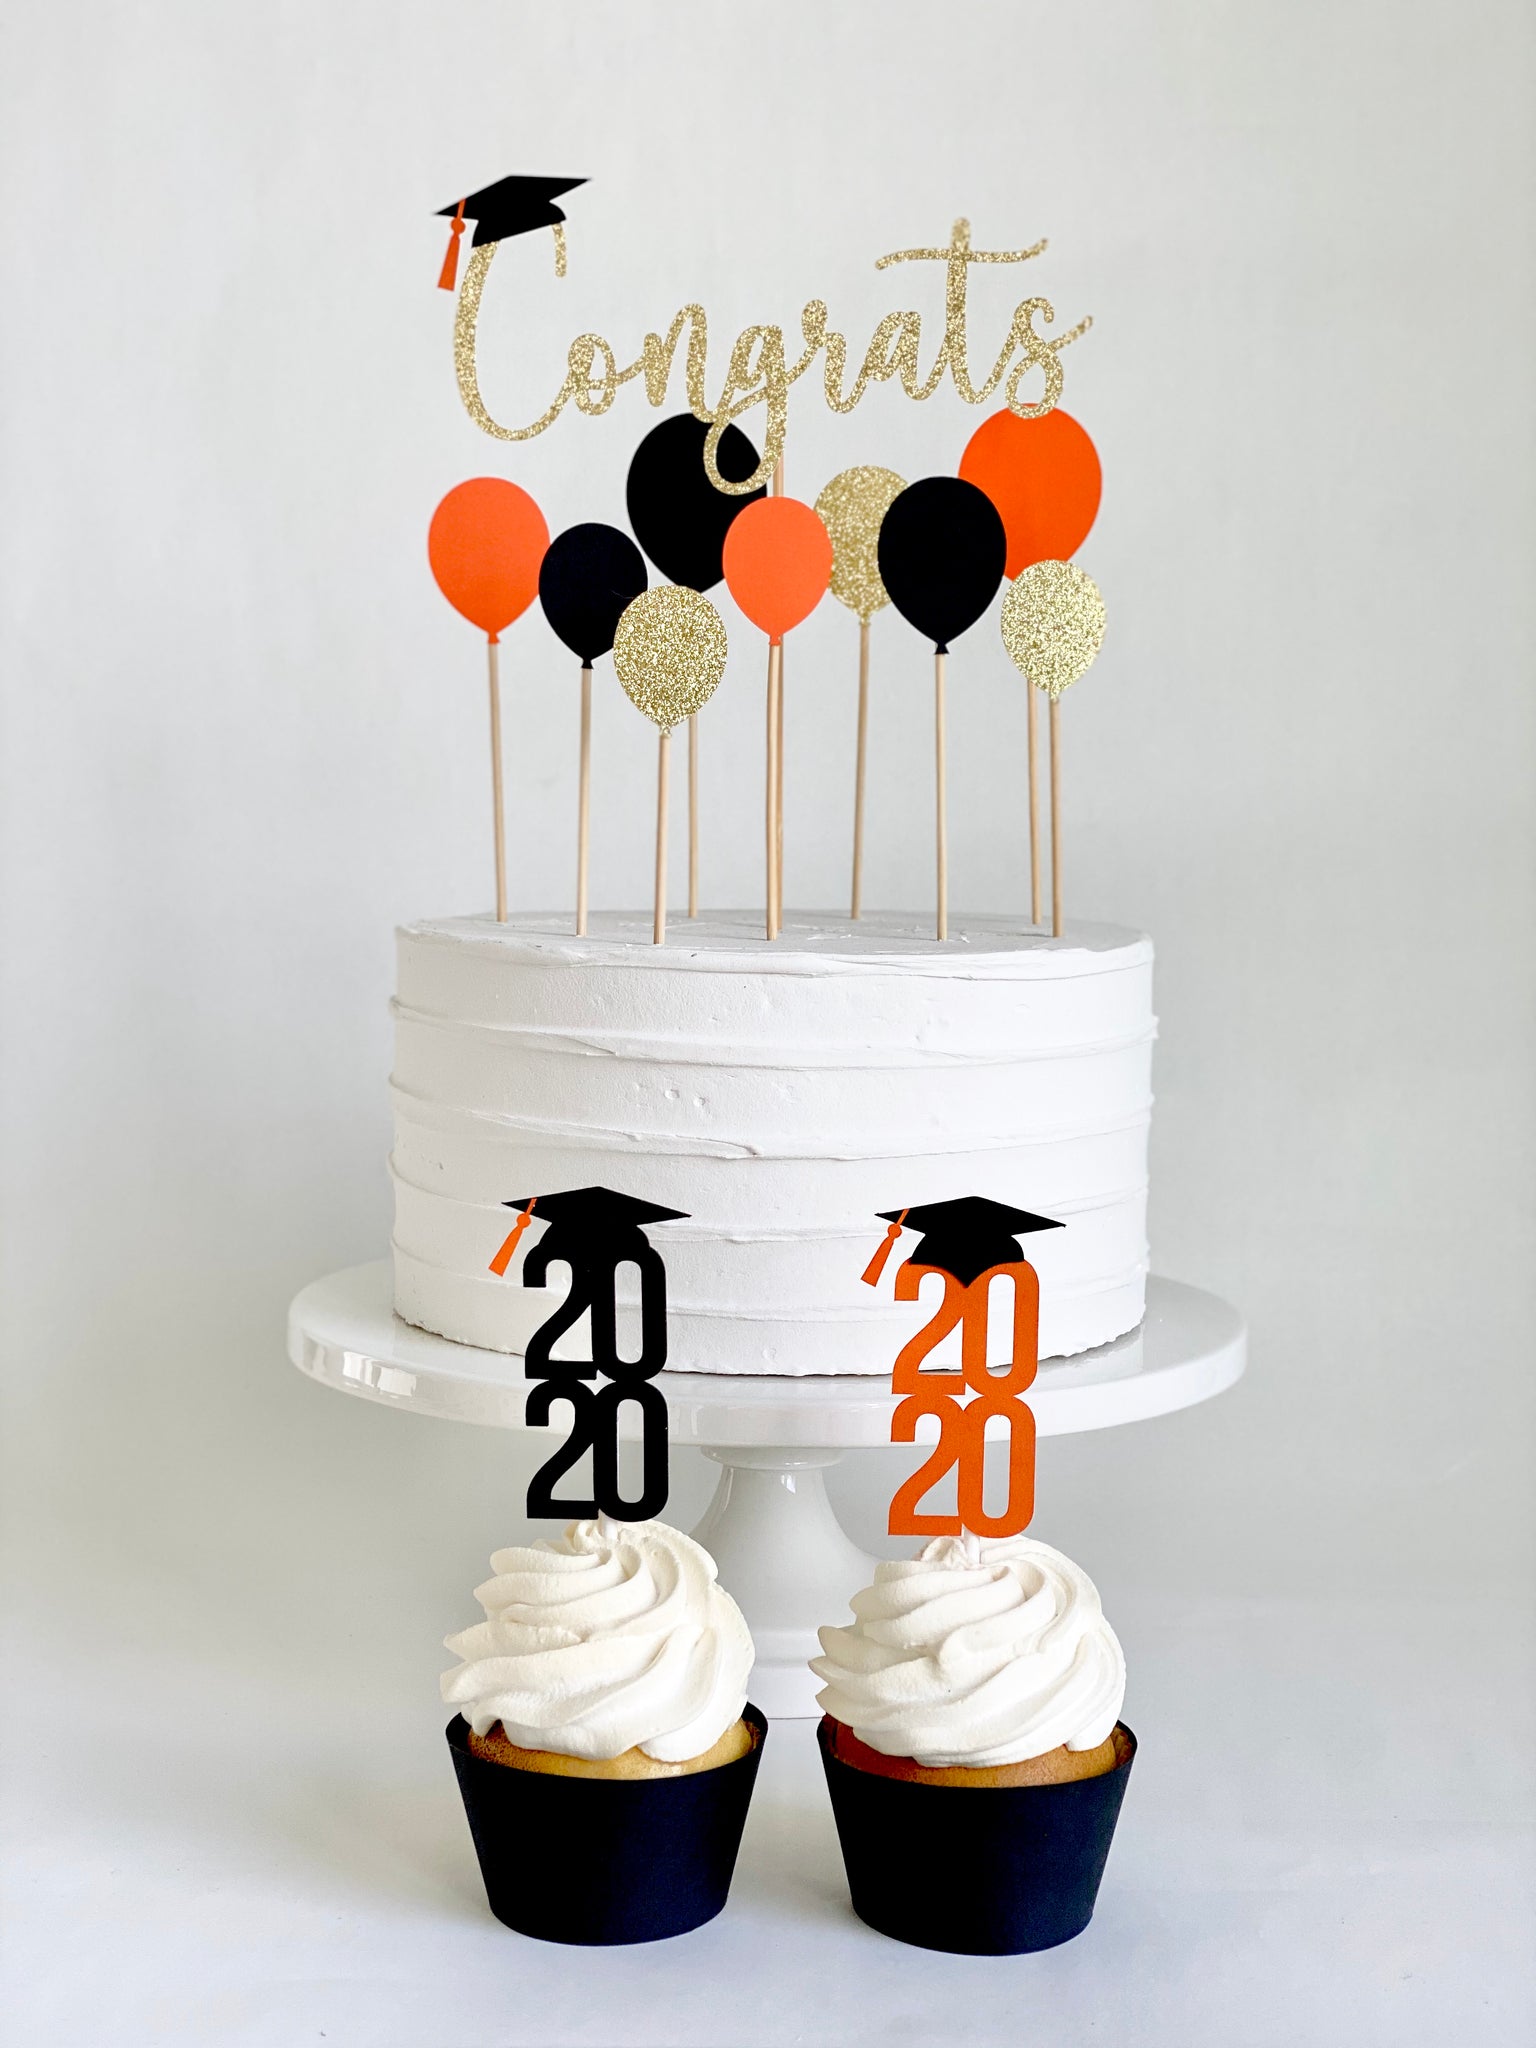 Celebrate Graduation in Style: Top Cake Toppers for a Sweet插图4